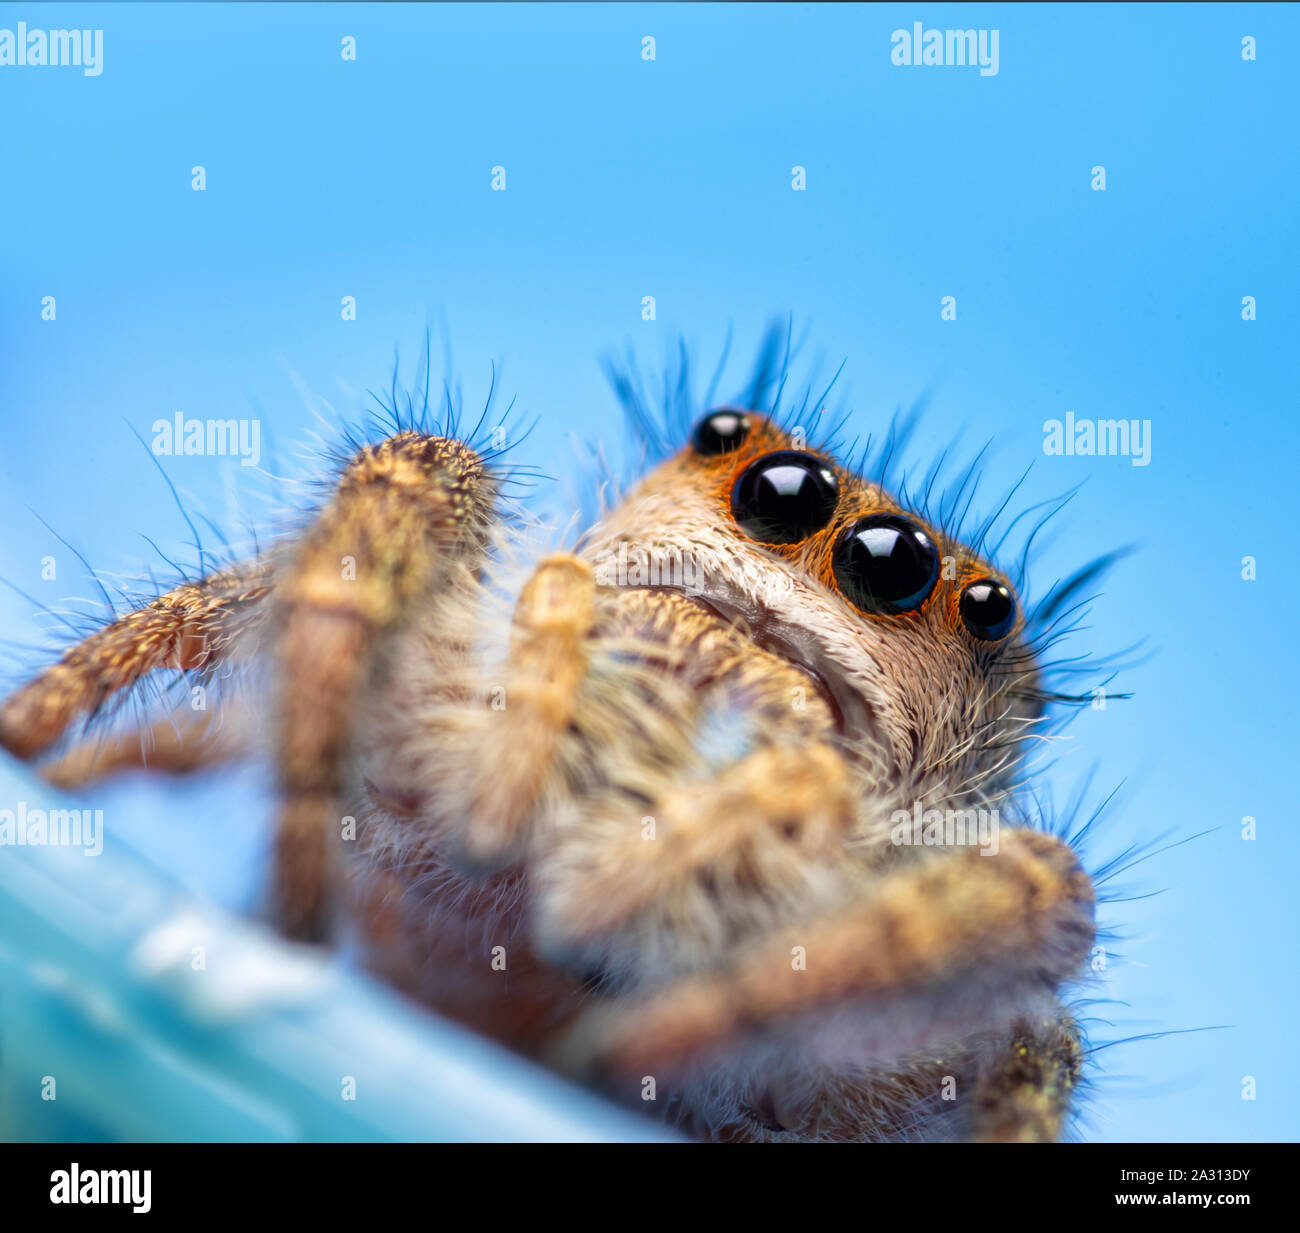 Adorable little female Phidippus princeps jumping spider looking up, on blue background Stock Photo